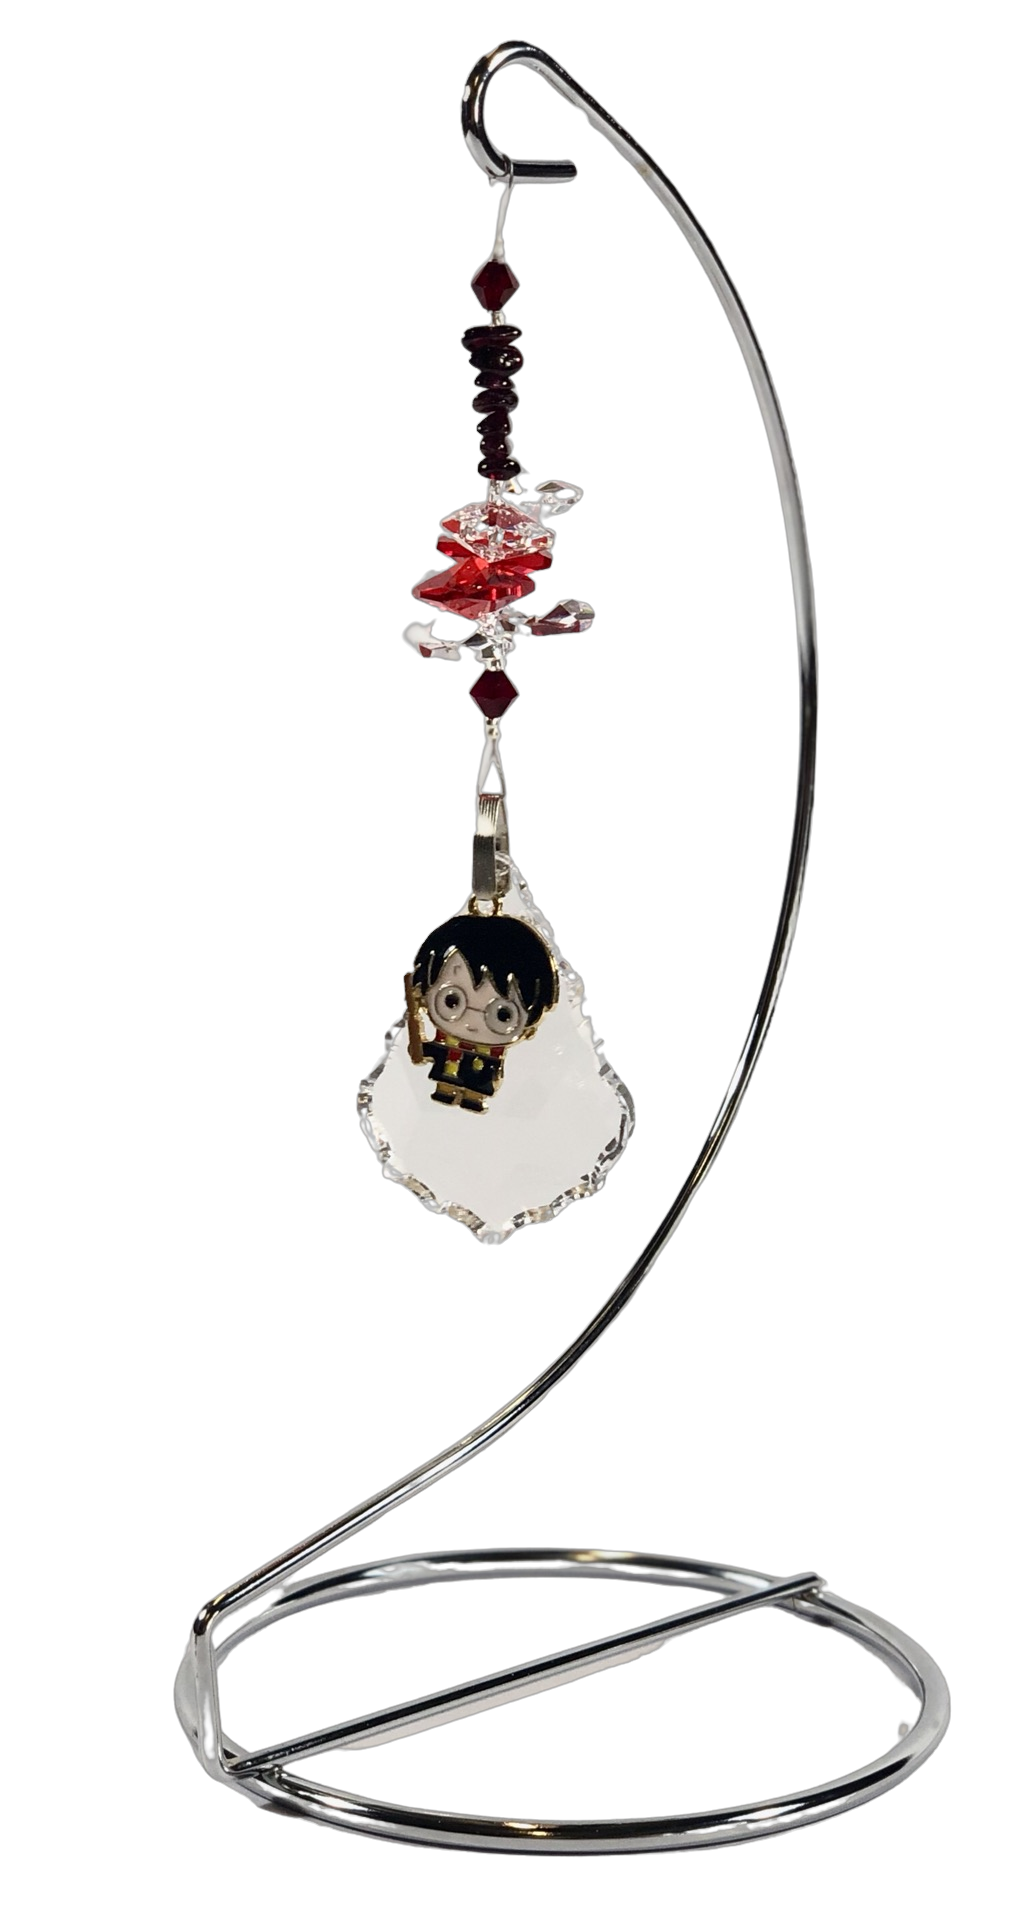 Harry Potter - crystal suncatcher is decorated with garnet gemstones and come on this amazing stand.